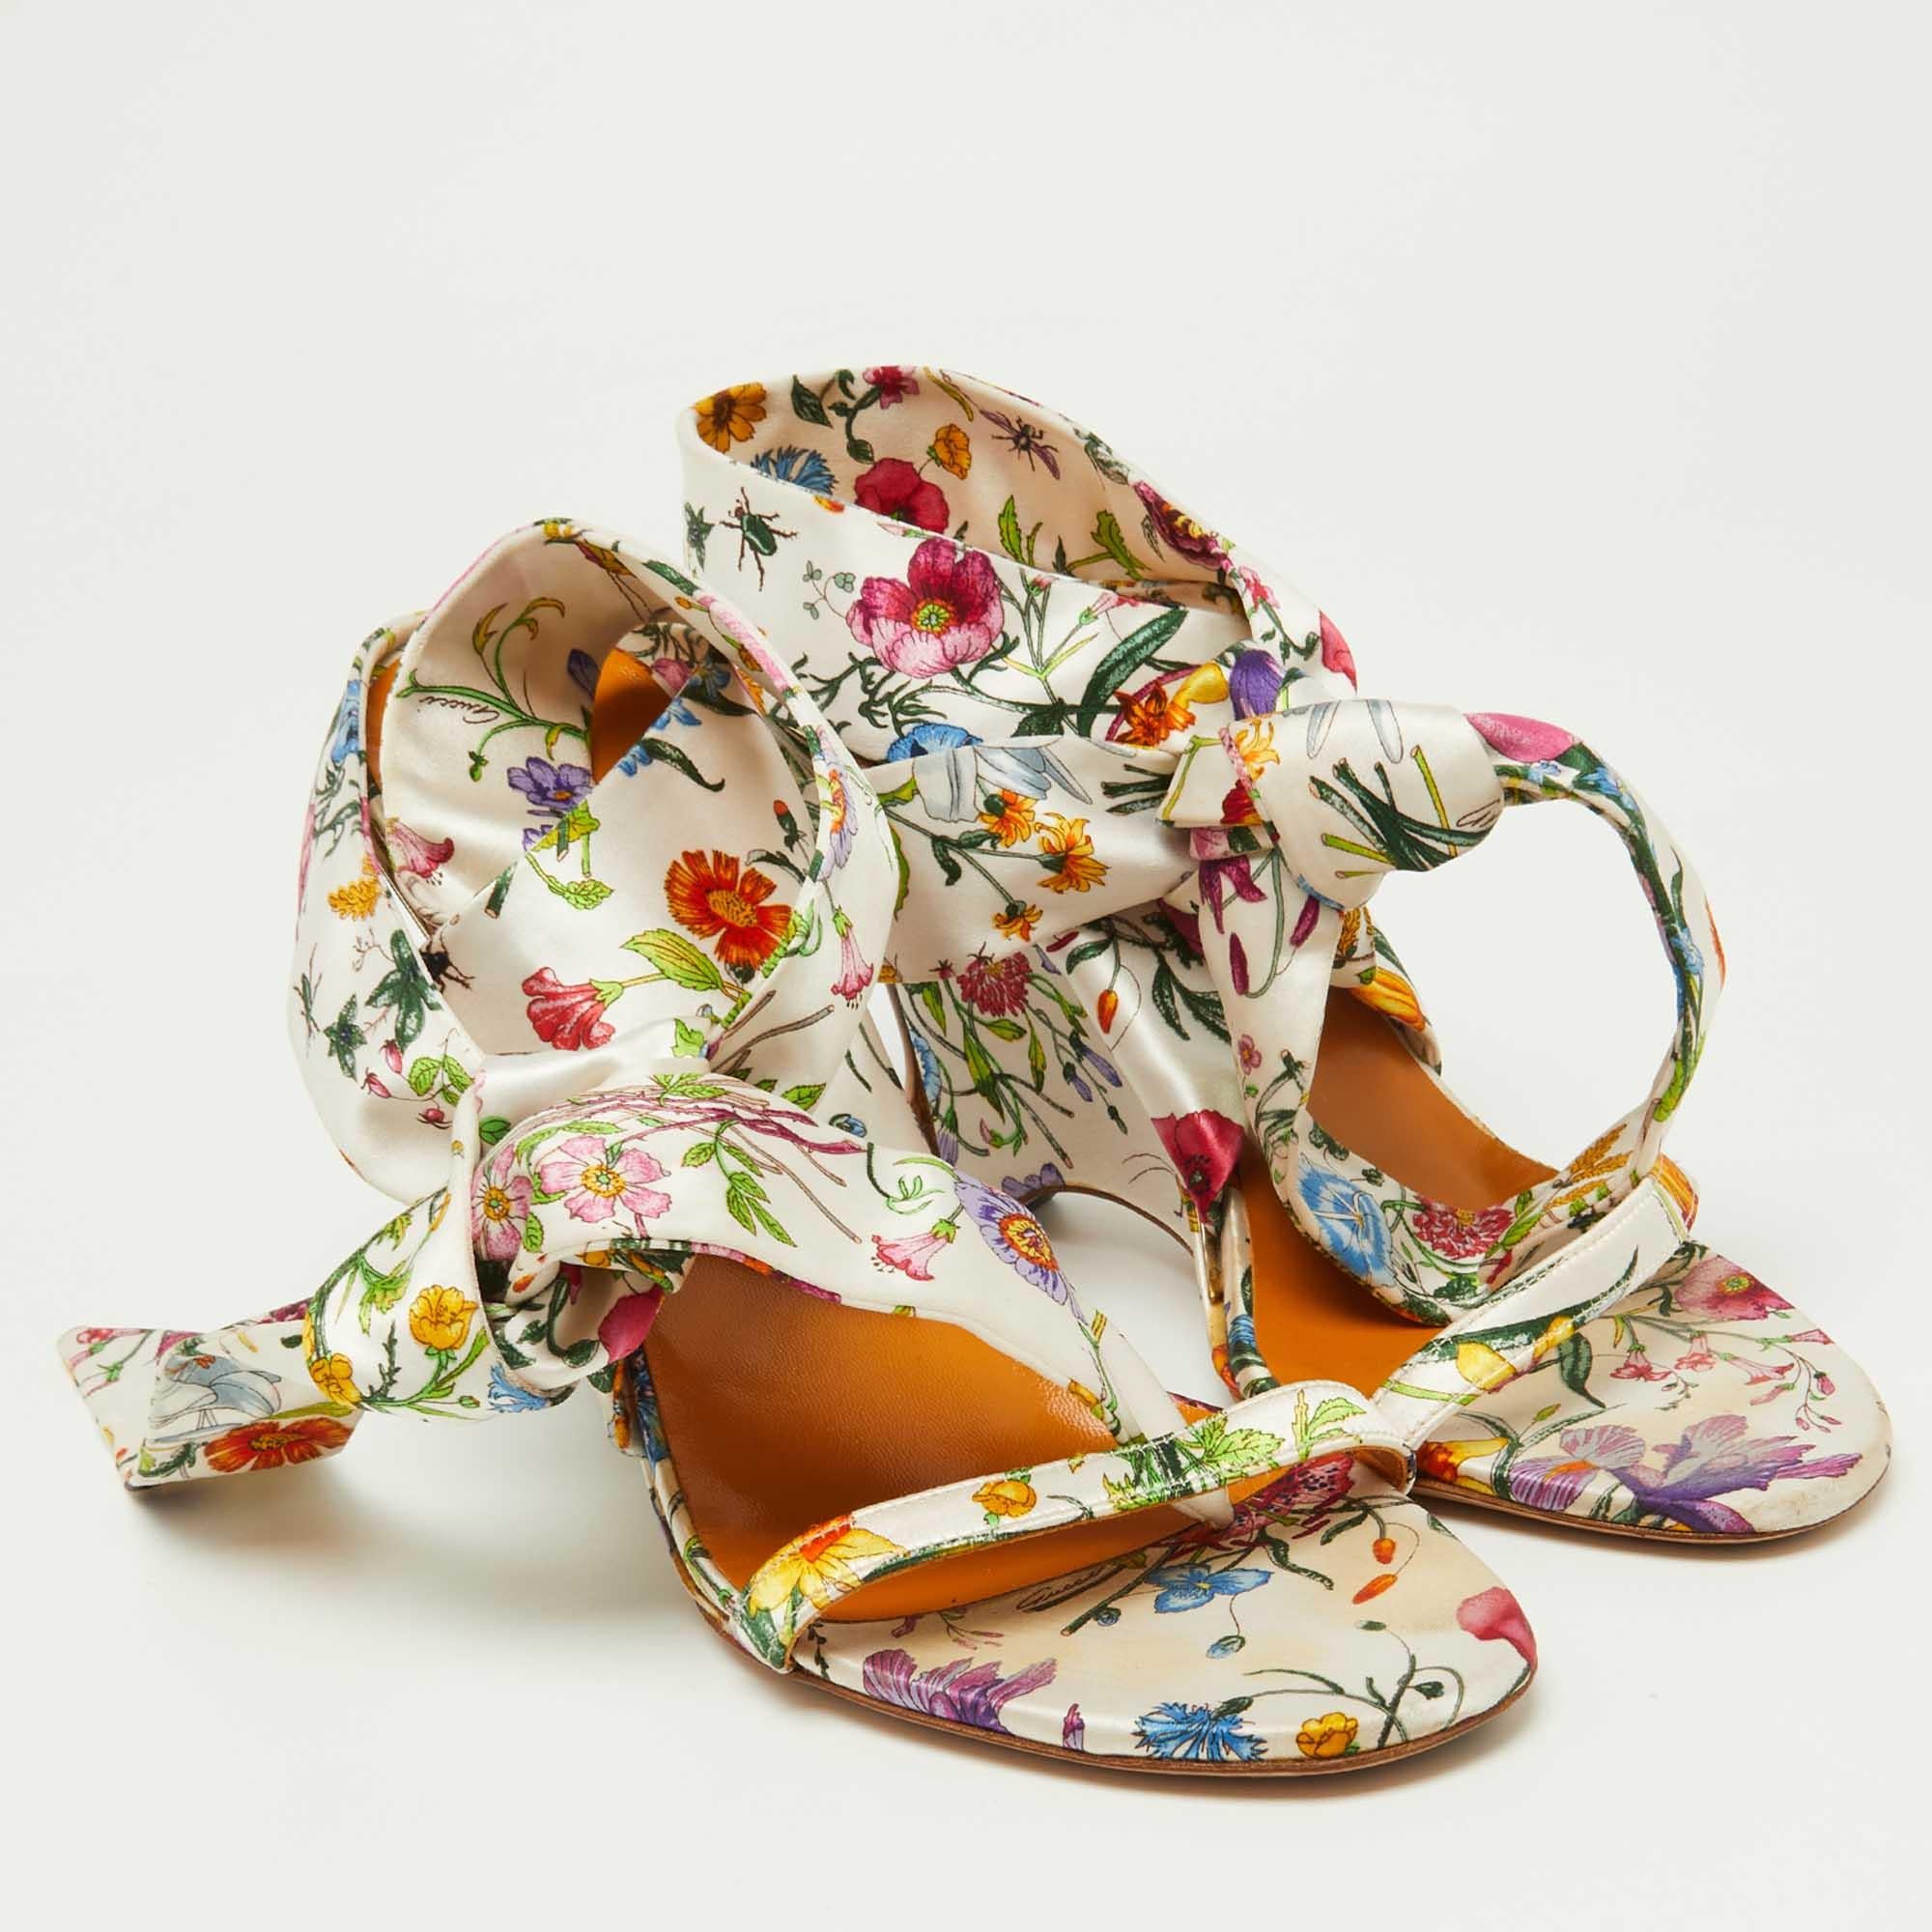 Gucci Floral Printed Satin Ankle Strap Wedge Sandals Size 38.5 For Sale 2